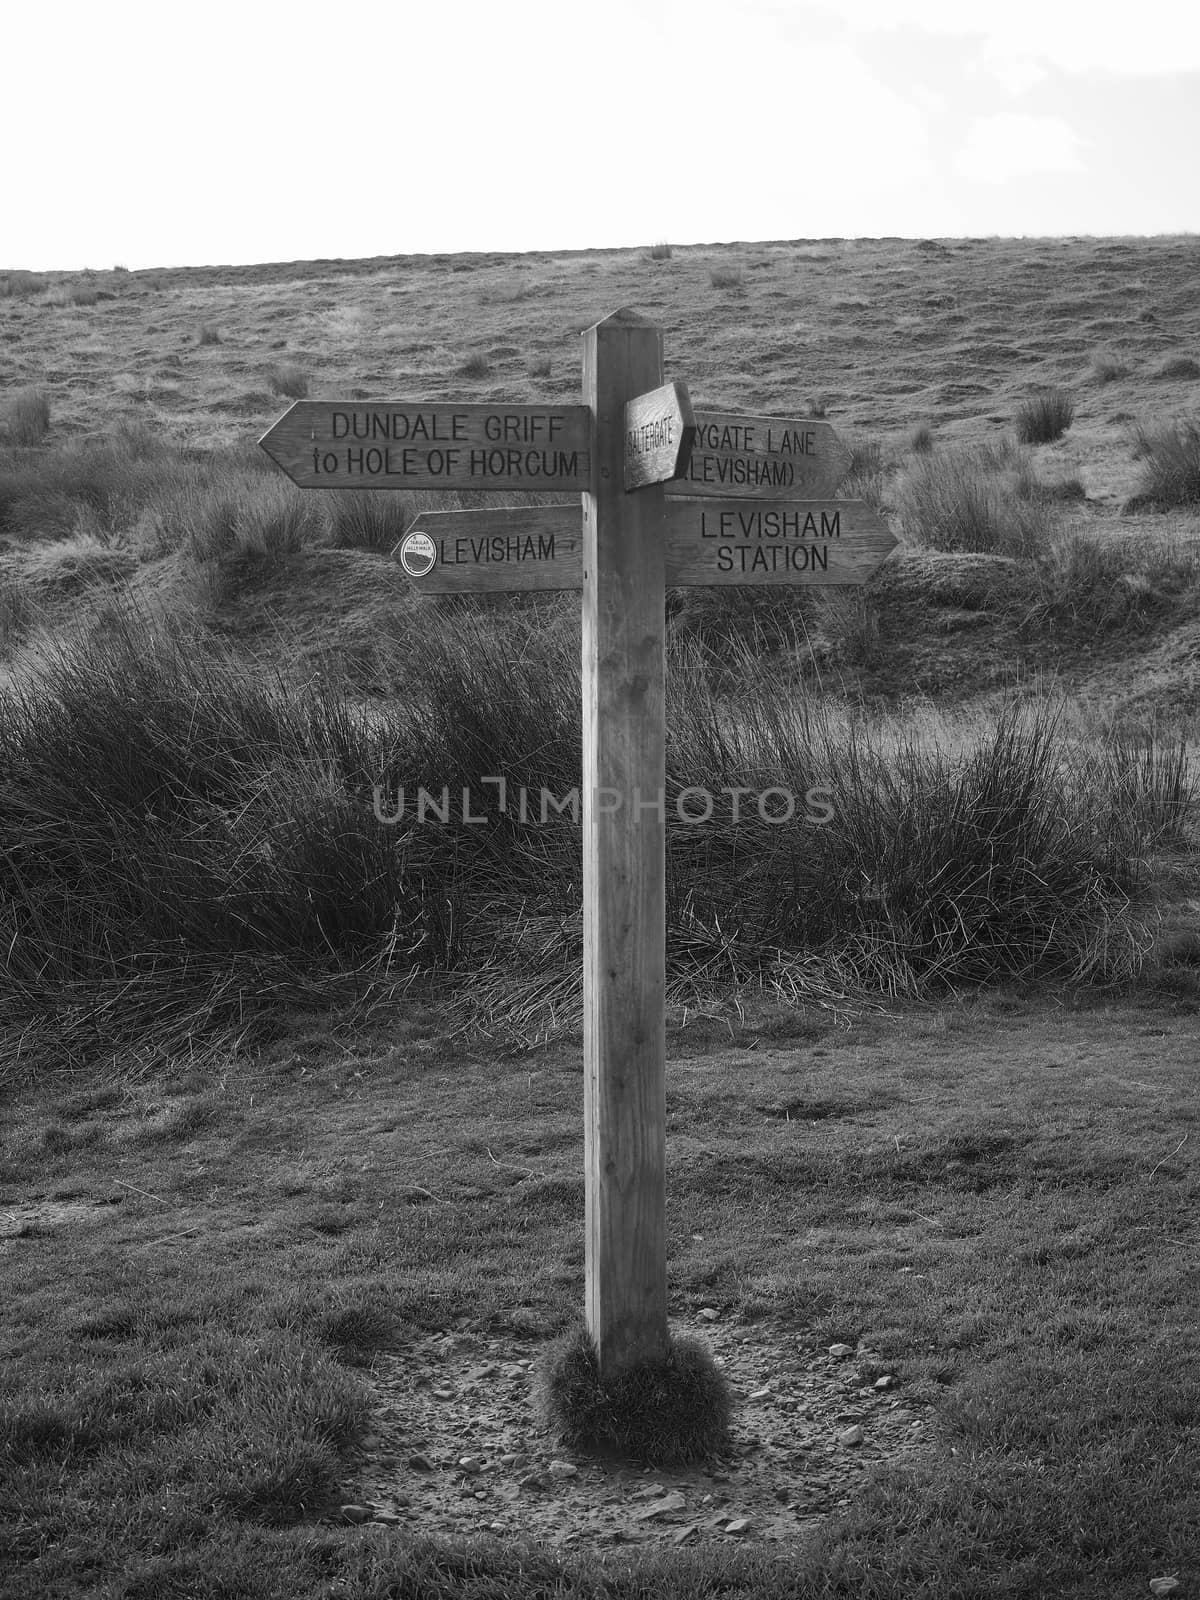 Signpost on walking paths shot in black and white by PhilHarland